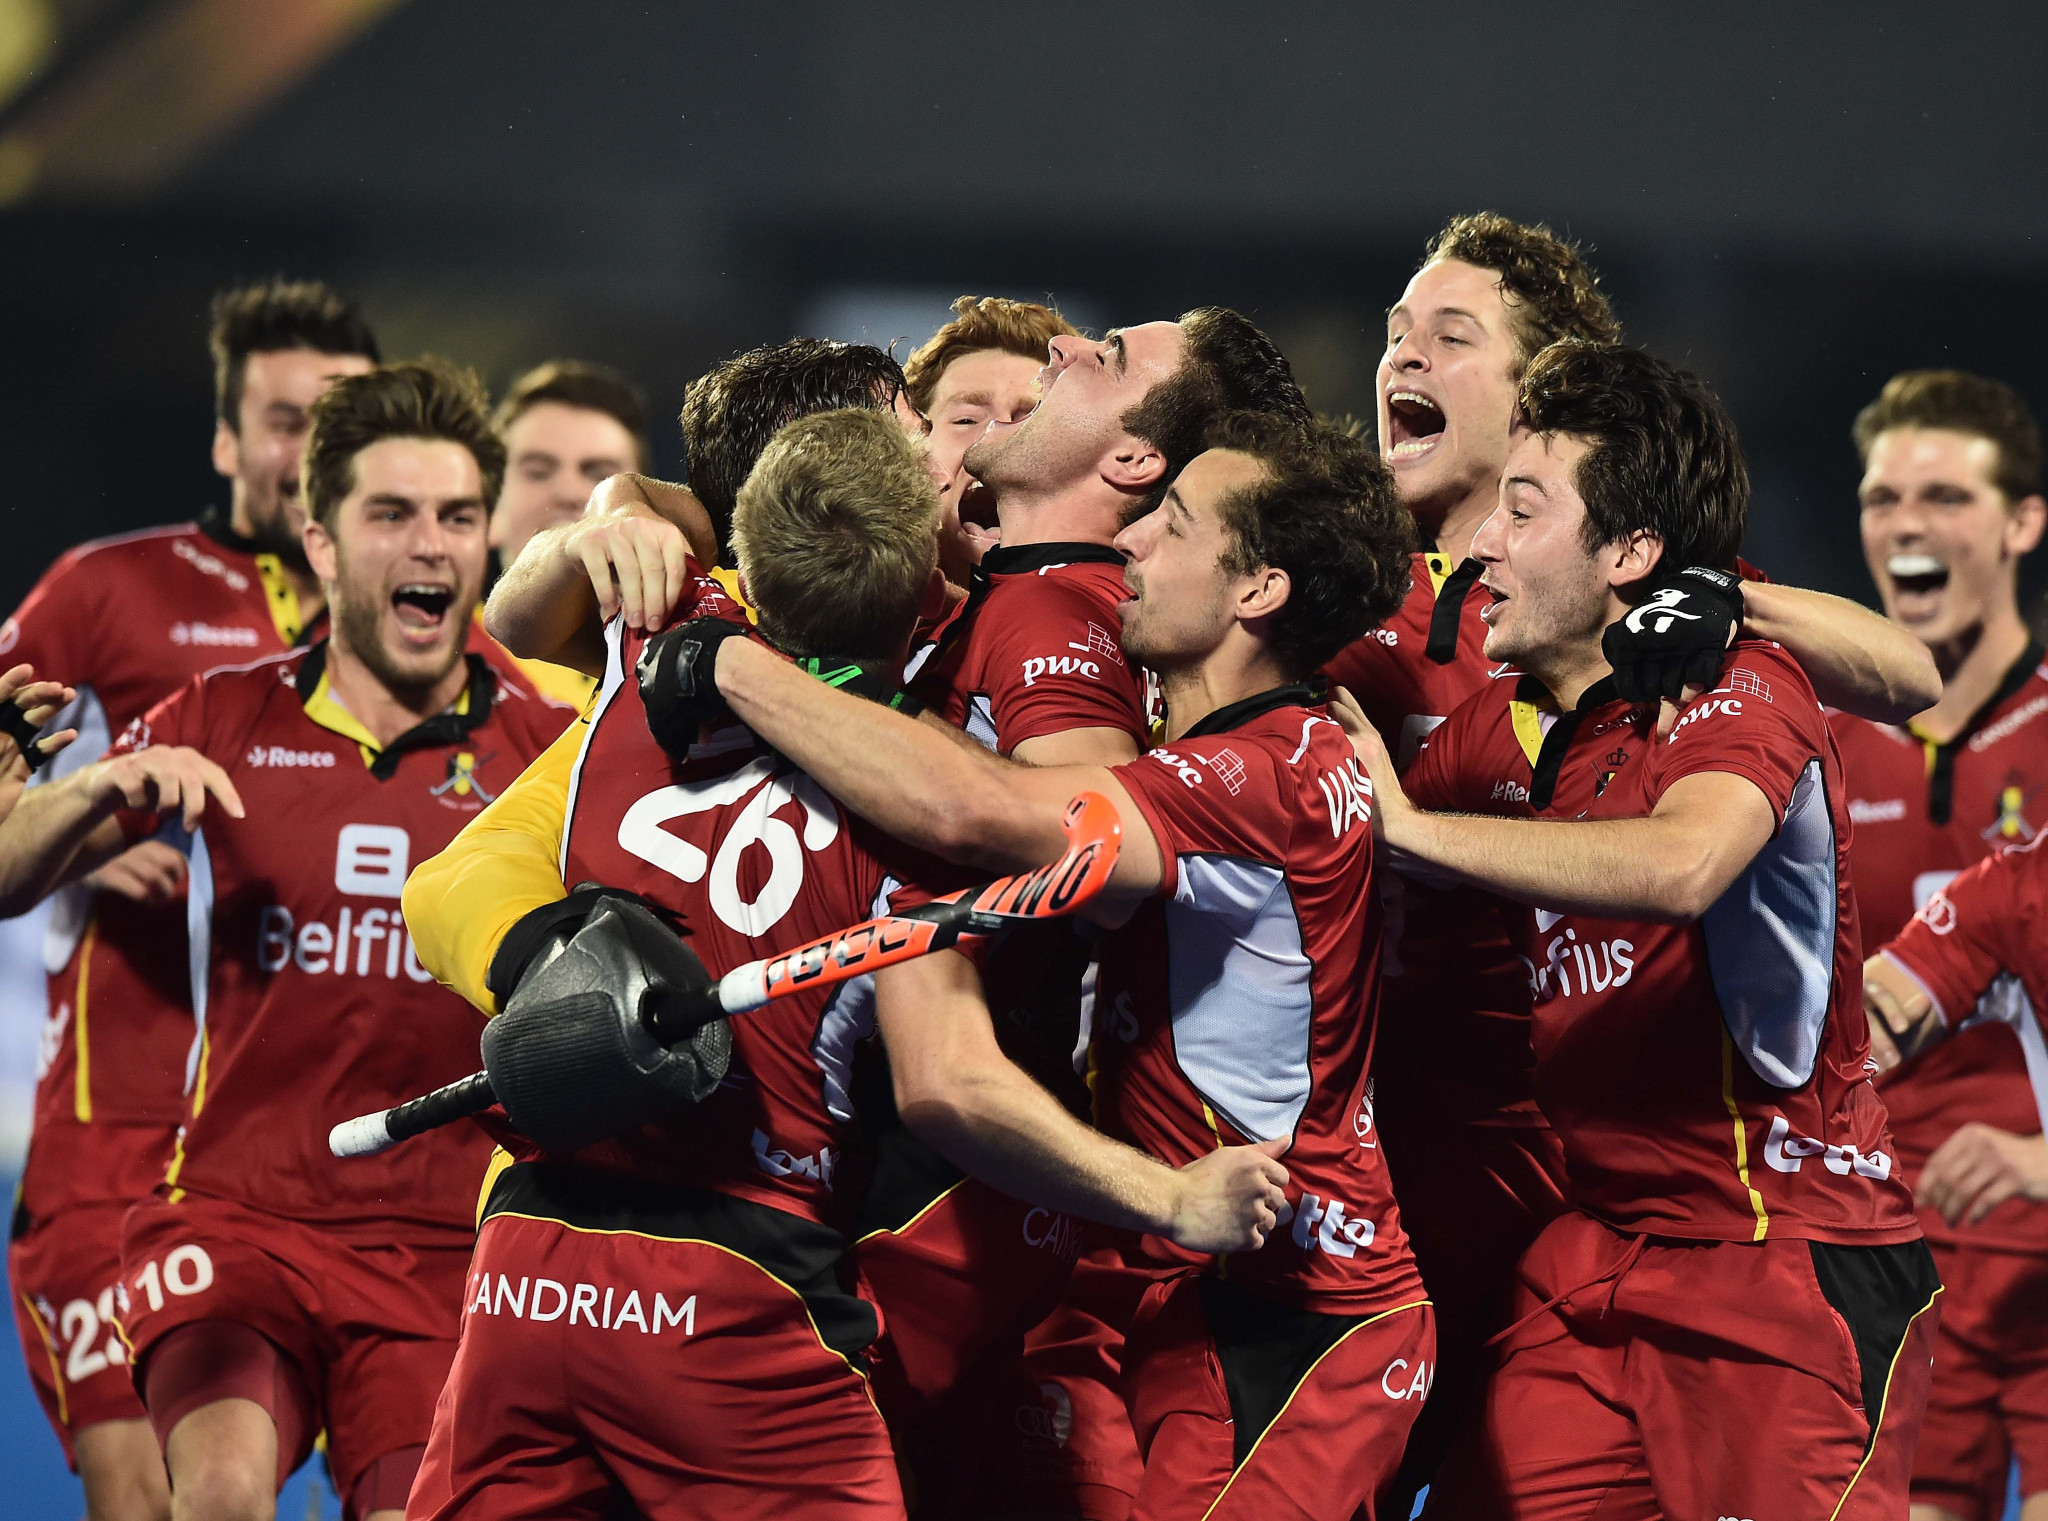 Belgium won the last edition of the FIH Hockey Men's World Cup ©Getty Images